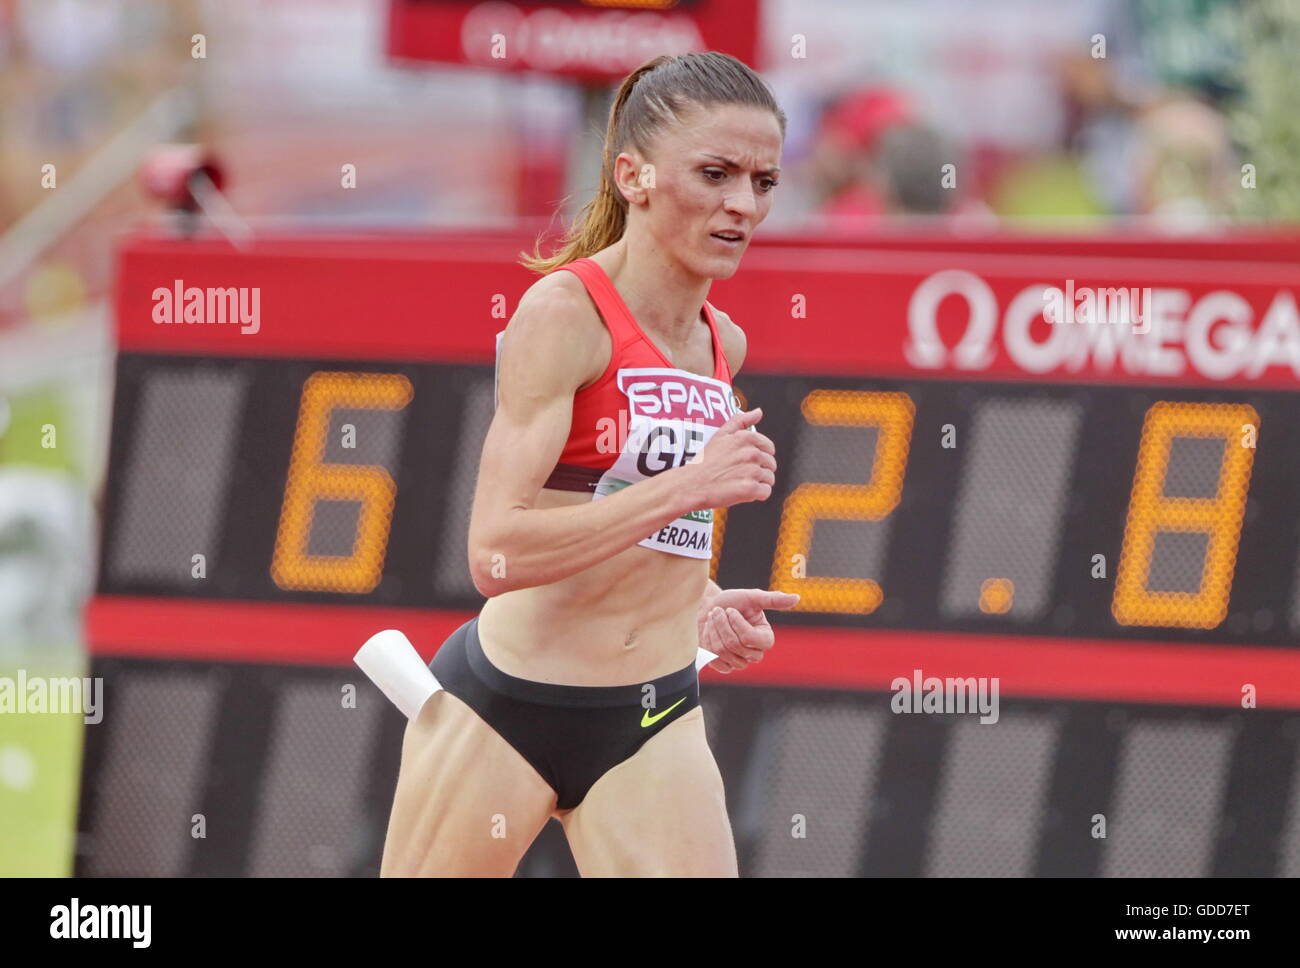 Amsterdam, Netherlands July 09, 2016 Luiza Gega 2nd in the 3000m steeplechase at the Amsterdam europe championship Stock Photo